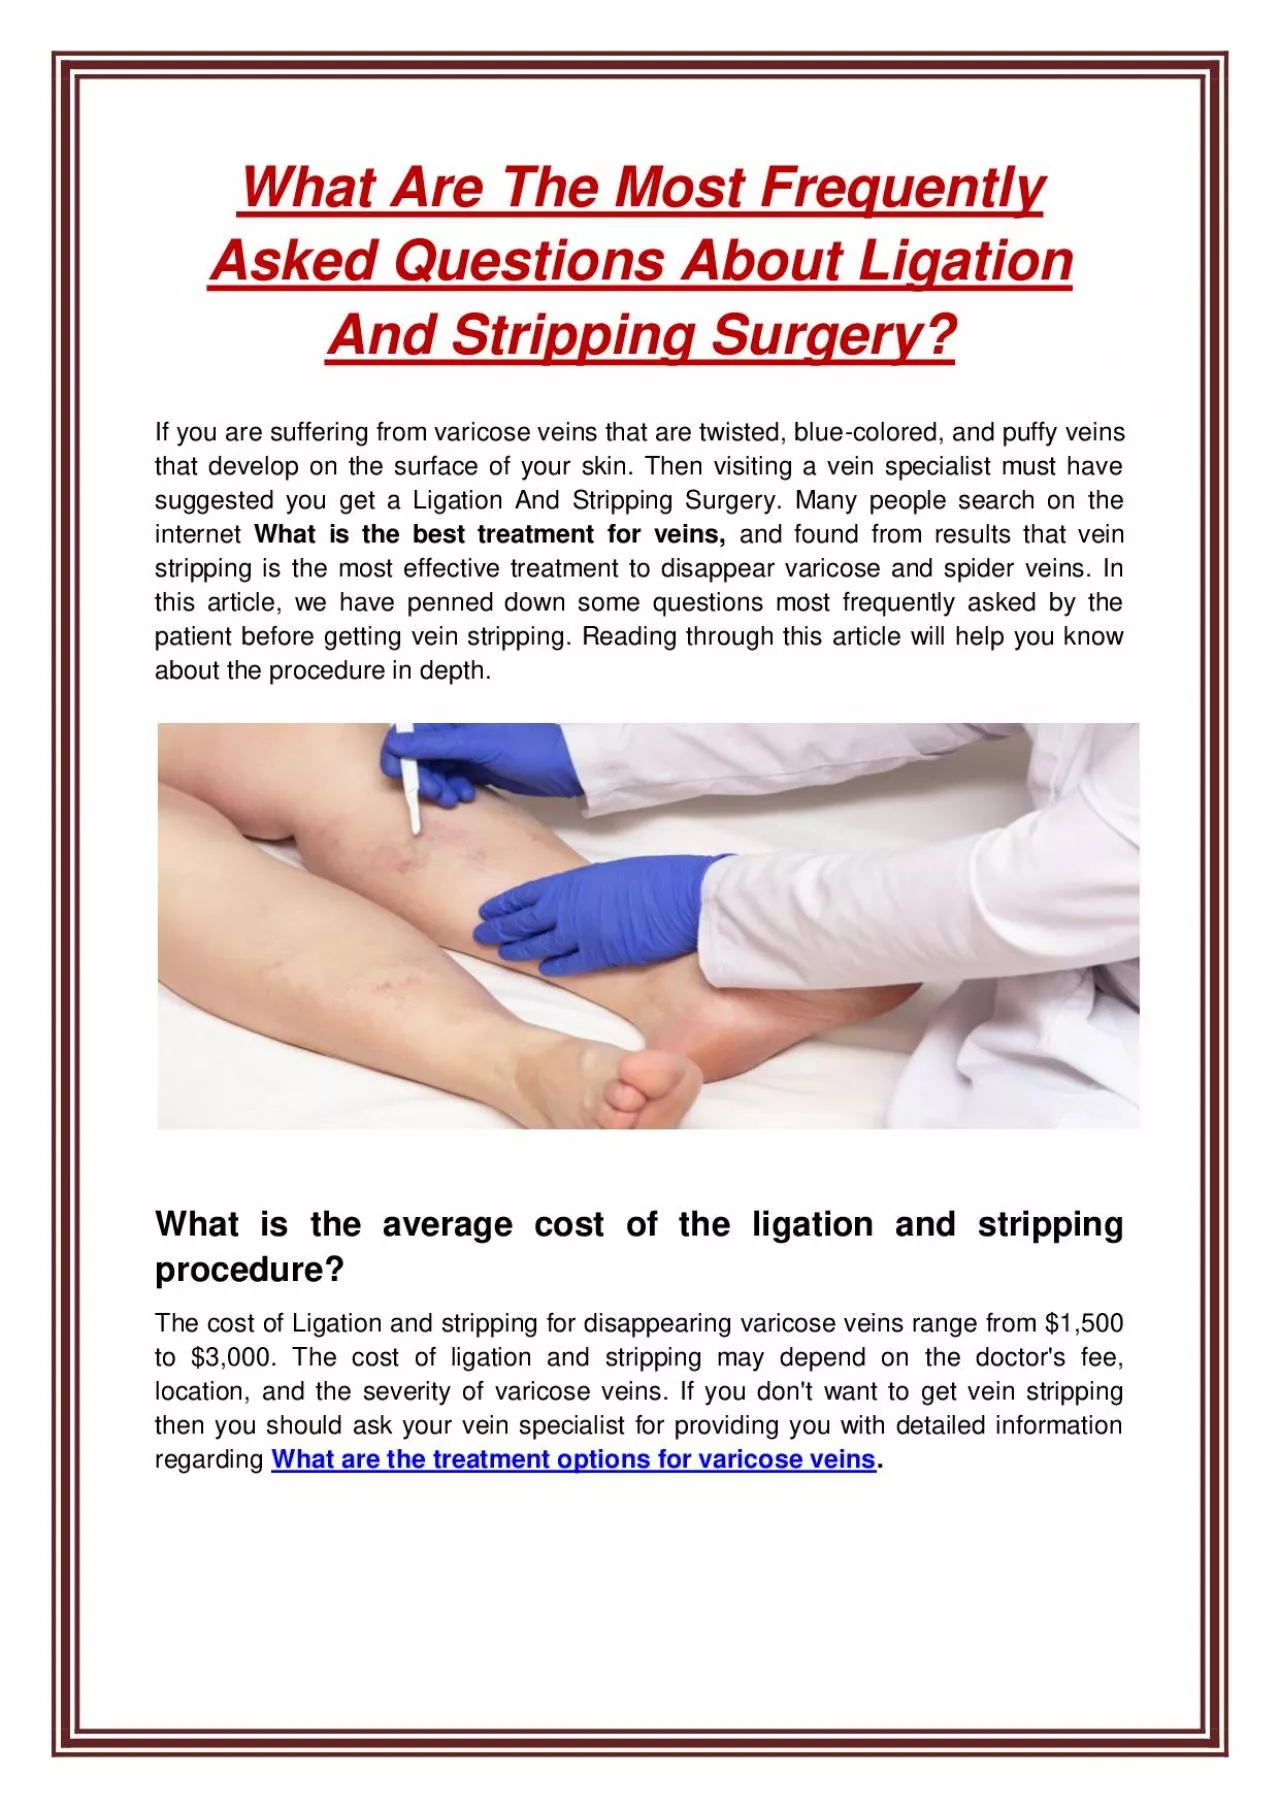 What Are The Most Frequently Asked Questions About Ligation And Stripping Surgery?